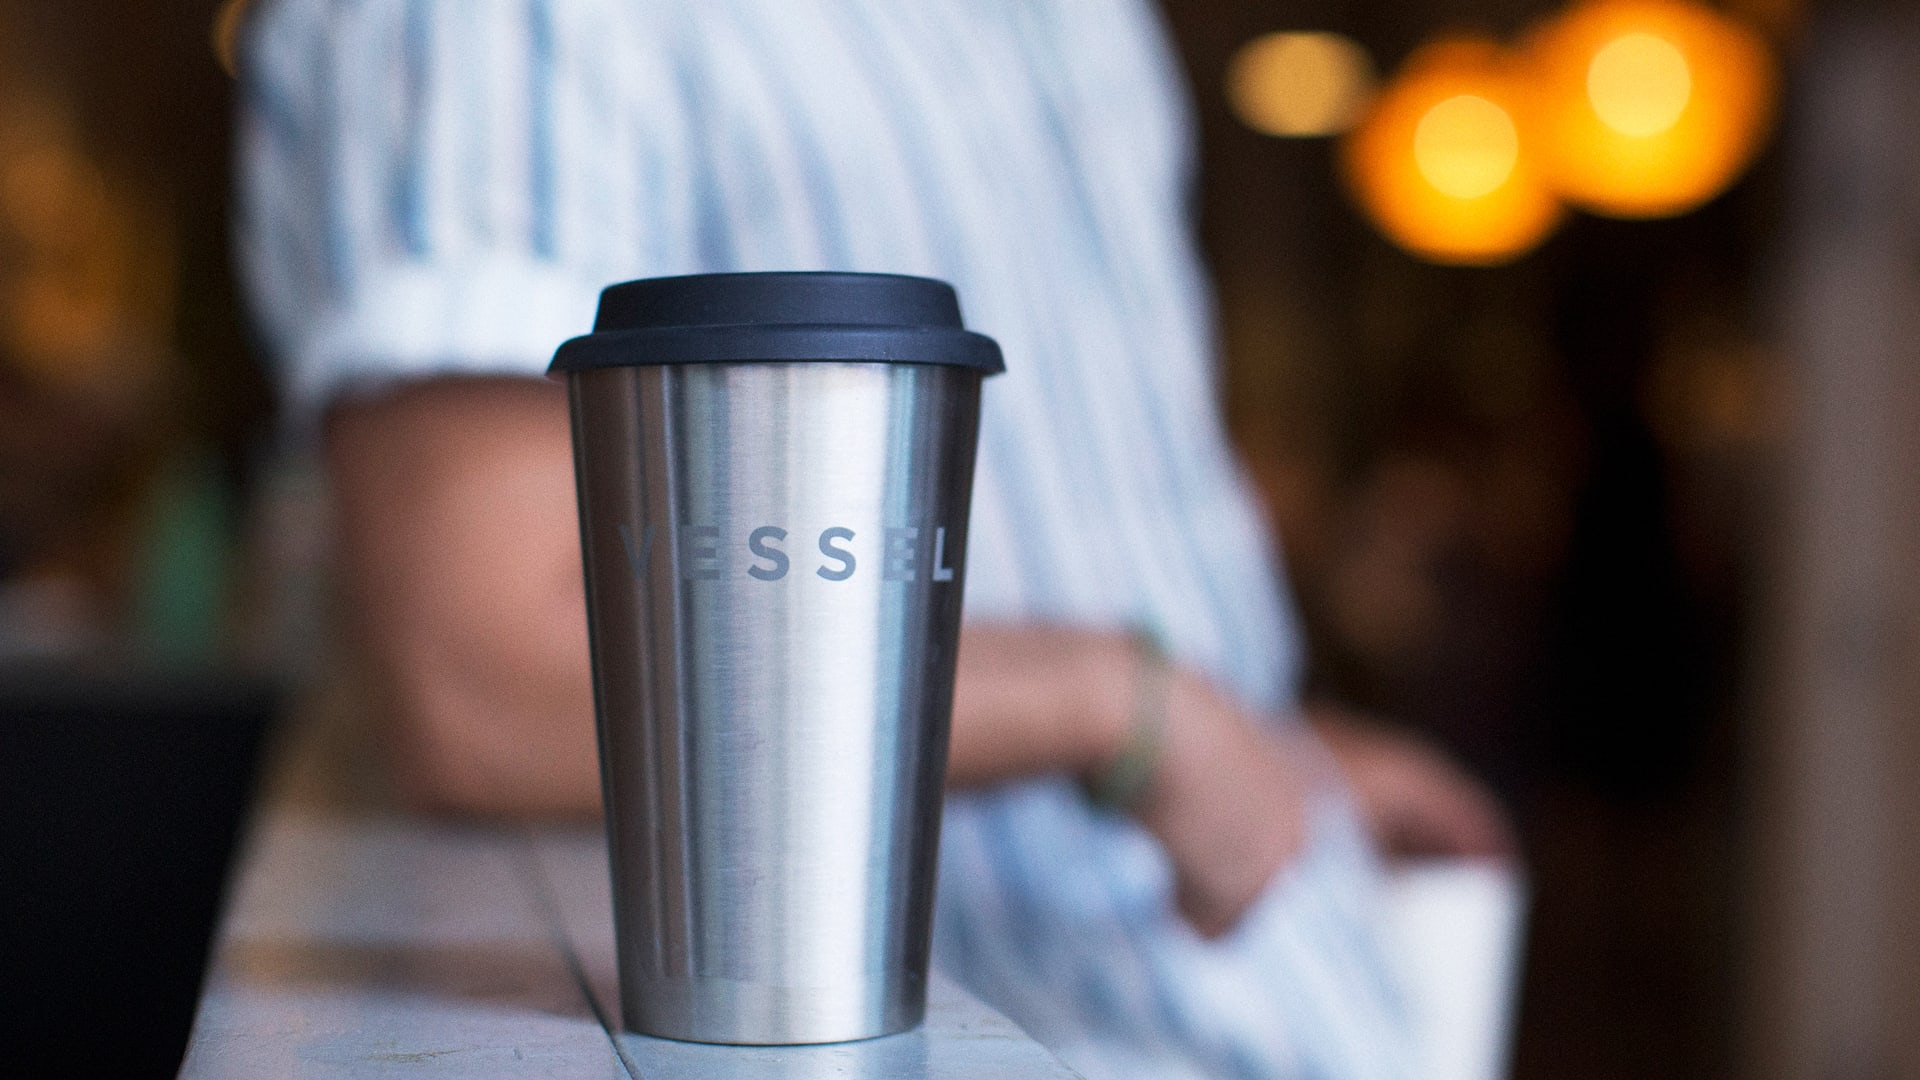 This free mug-share keeps you from wasting paper cups